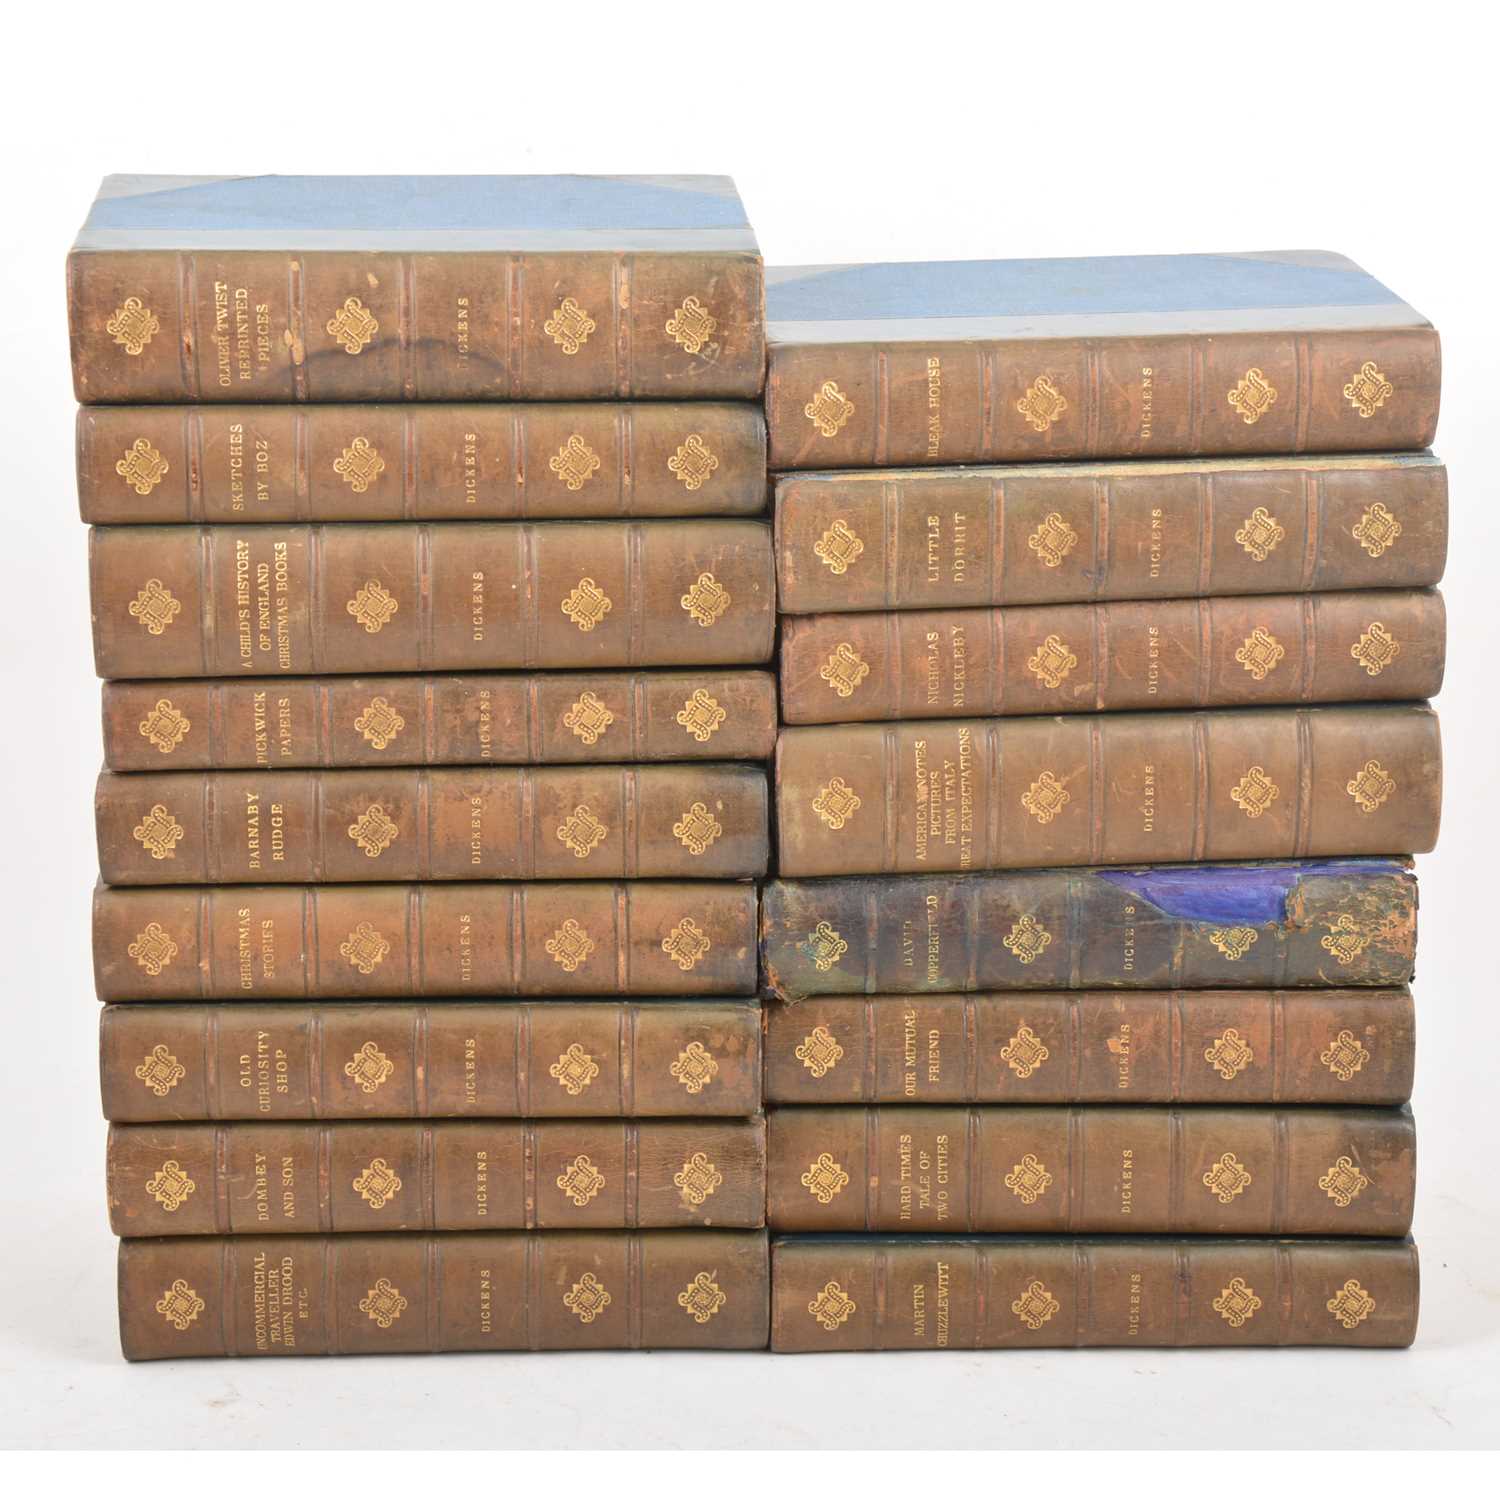 Lot 188 - Seventeen Charles Dickens novels and travel books, Chapman & Hall Ltd and Humphrey Milford, London and New York.